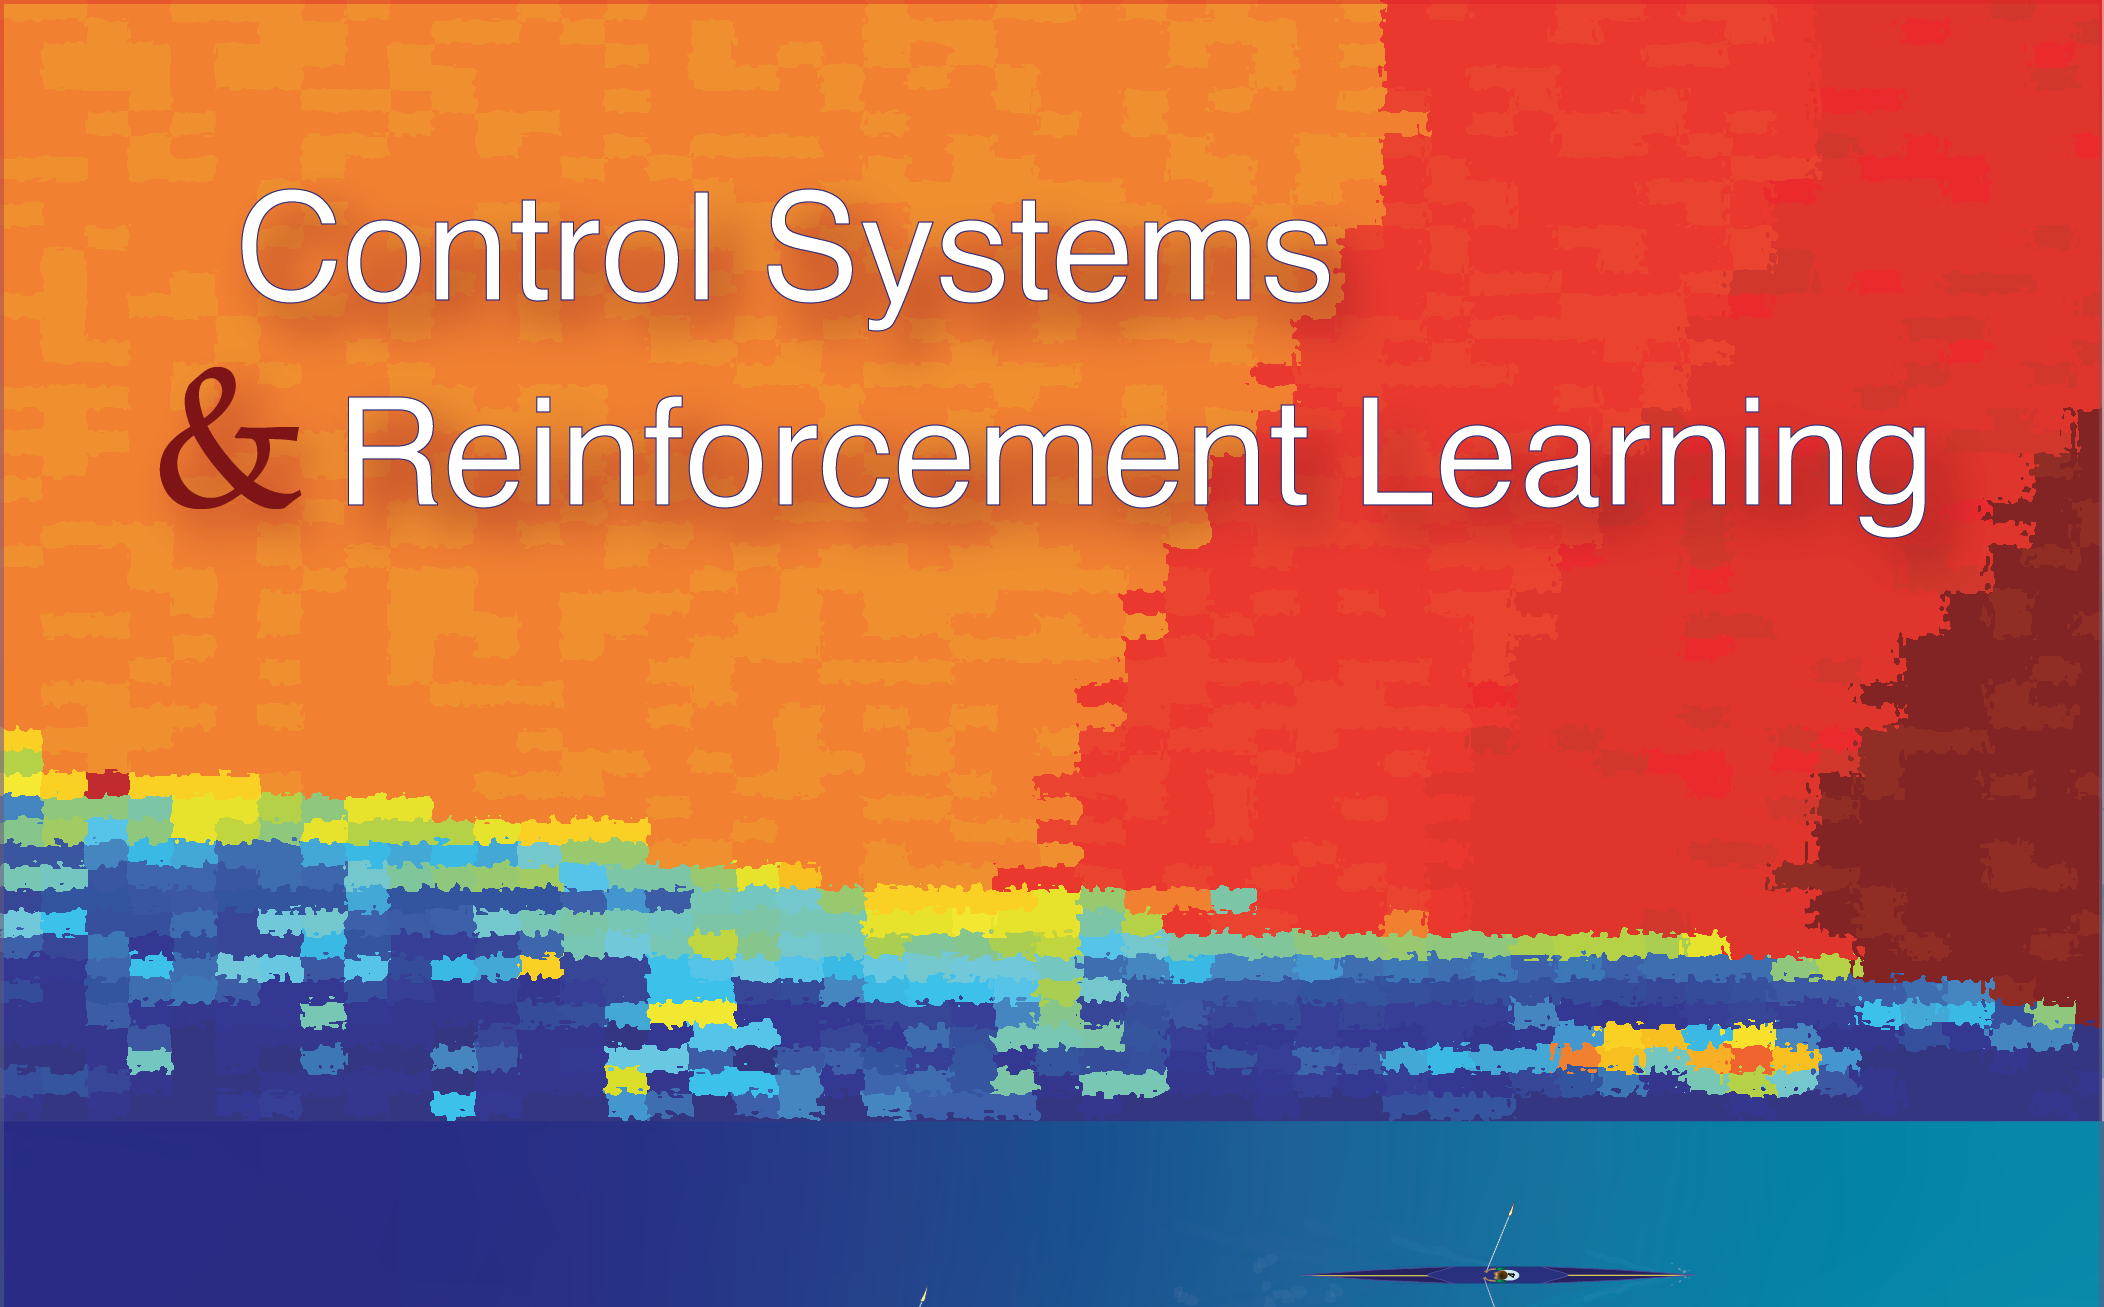 Control Systems & Reinforcement Learning